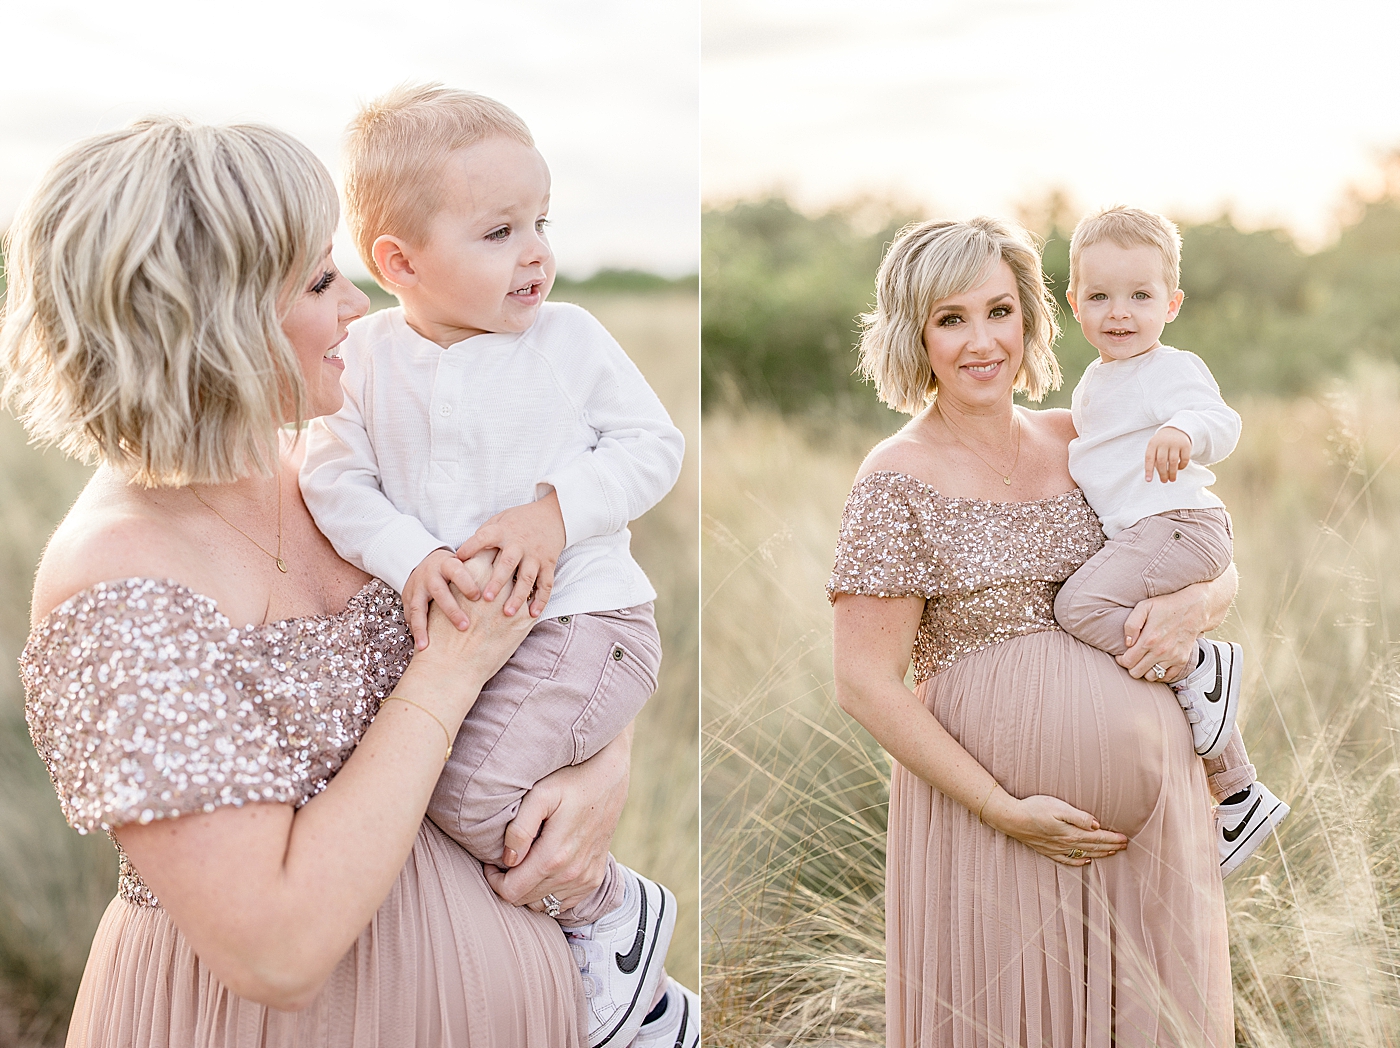 Pregnant Mama holding her young toddler son for pregnancy photoshoot. Photos by Brittany Elise Photography.